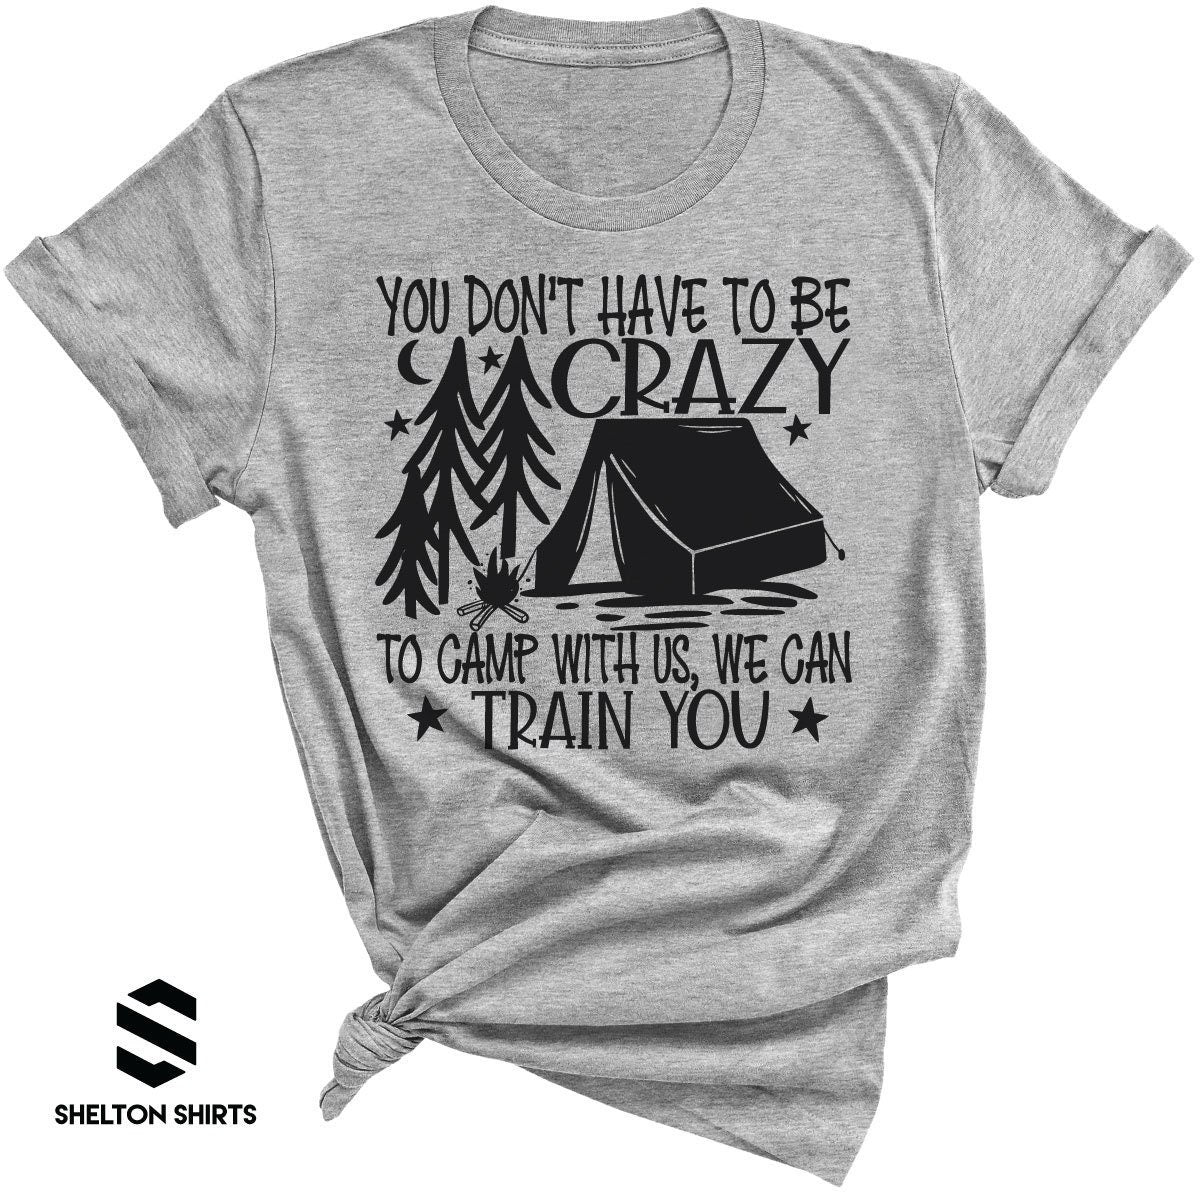 You don't have to be crazy to camp with us we can train you Funny T-Sh –  SheltonShirts